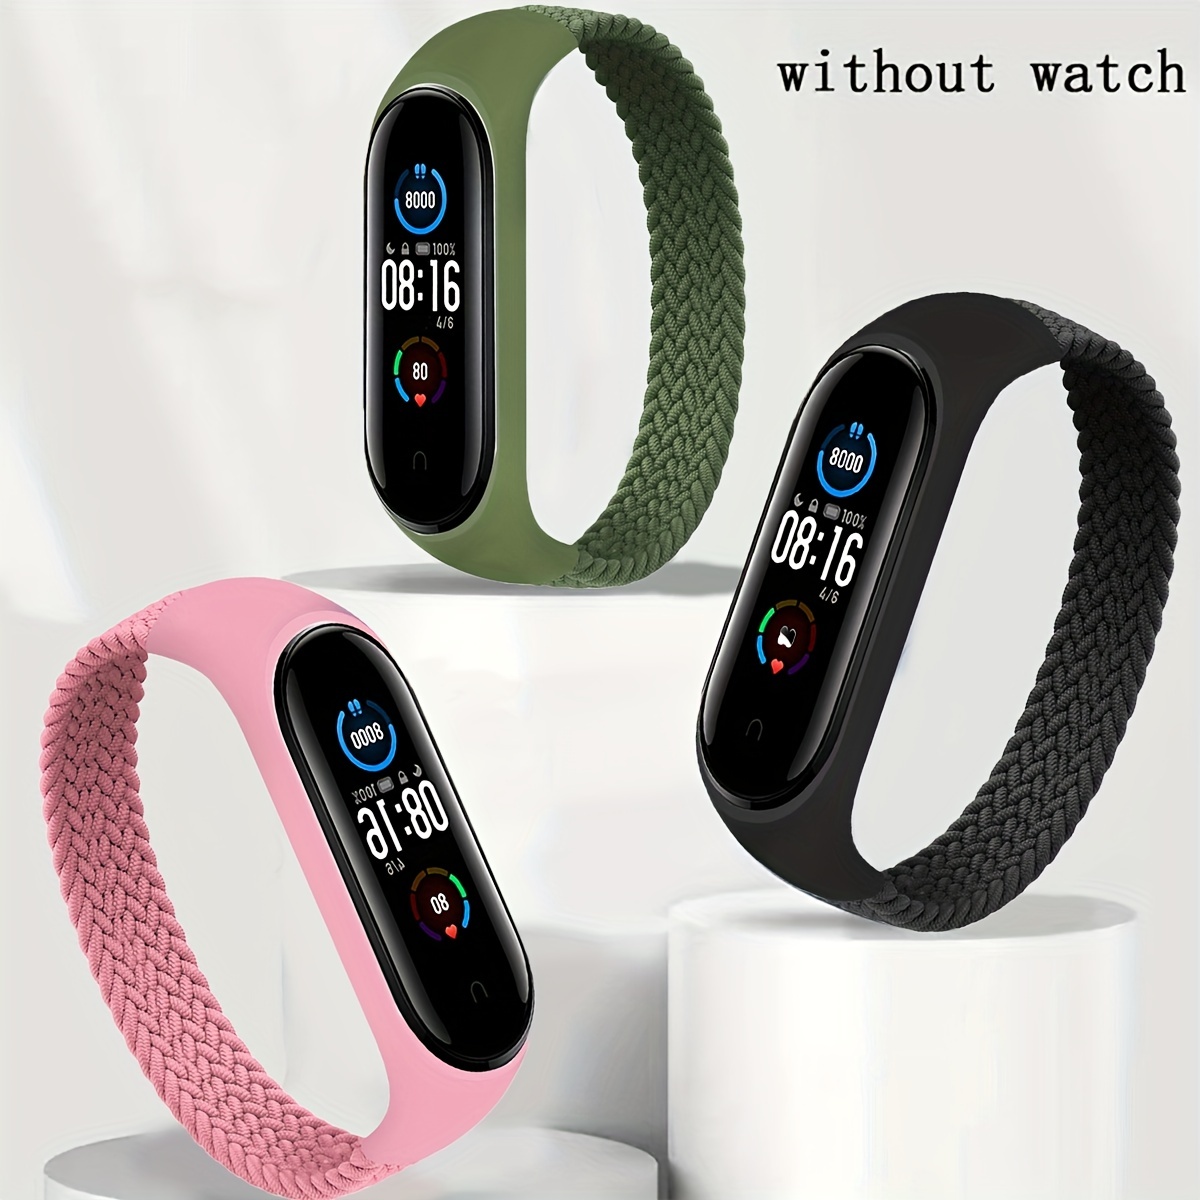 Strap For Xiaomi Mi Band 4 3 5 6 Watch Band Creative Braided Nylon Style  Bracelet Replacement For XiaoMi Band 5 6 7 Wristband - AliExpress